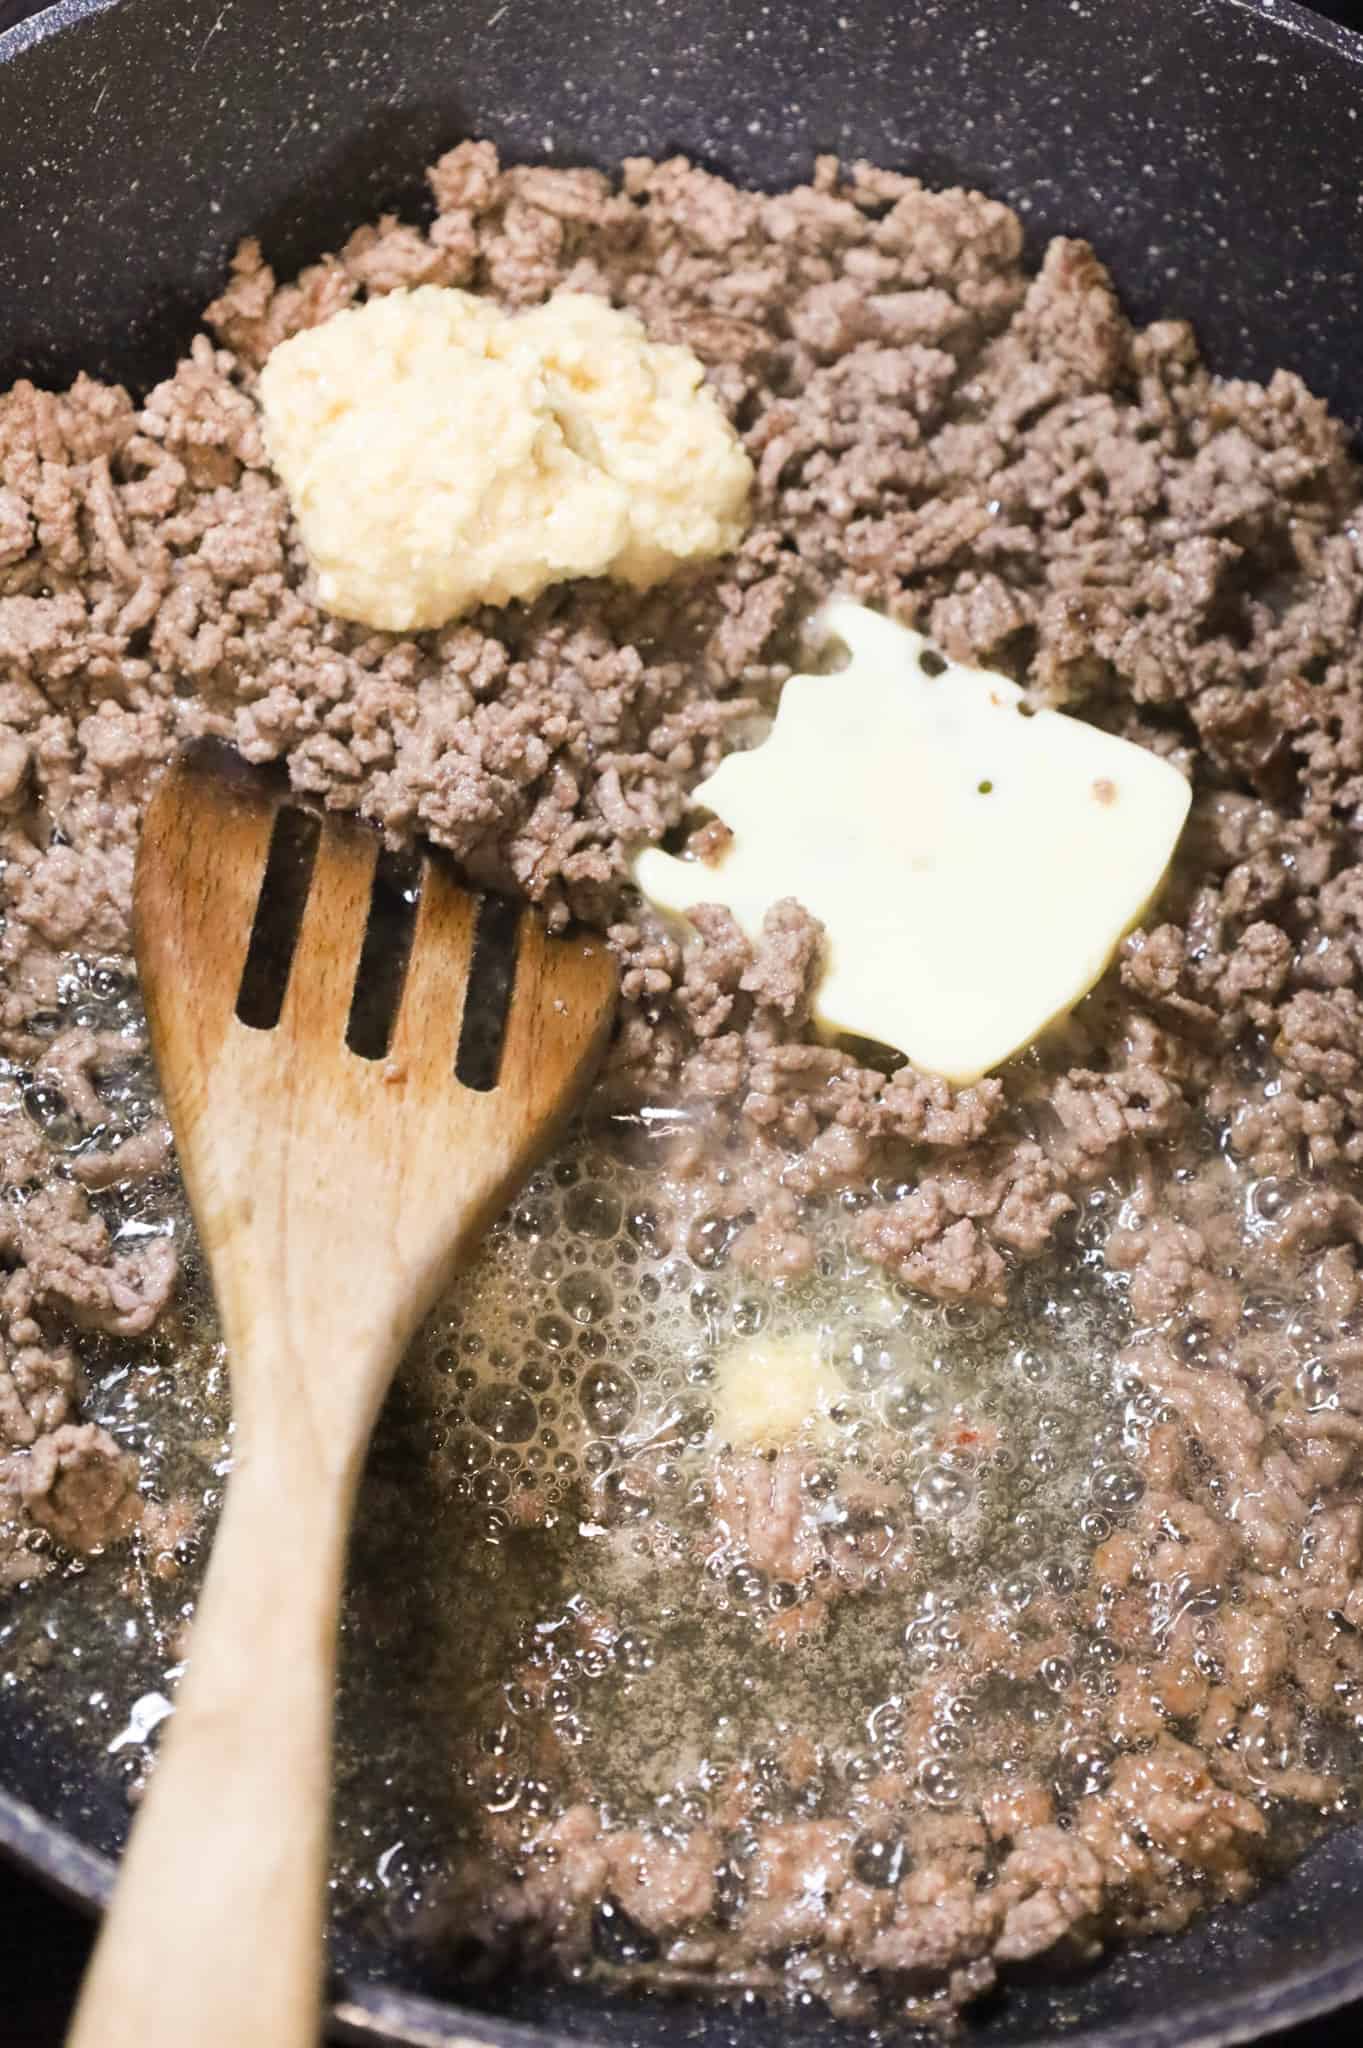 butter and garlic puree on top of cooked ground beef in a skillet